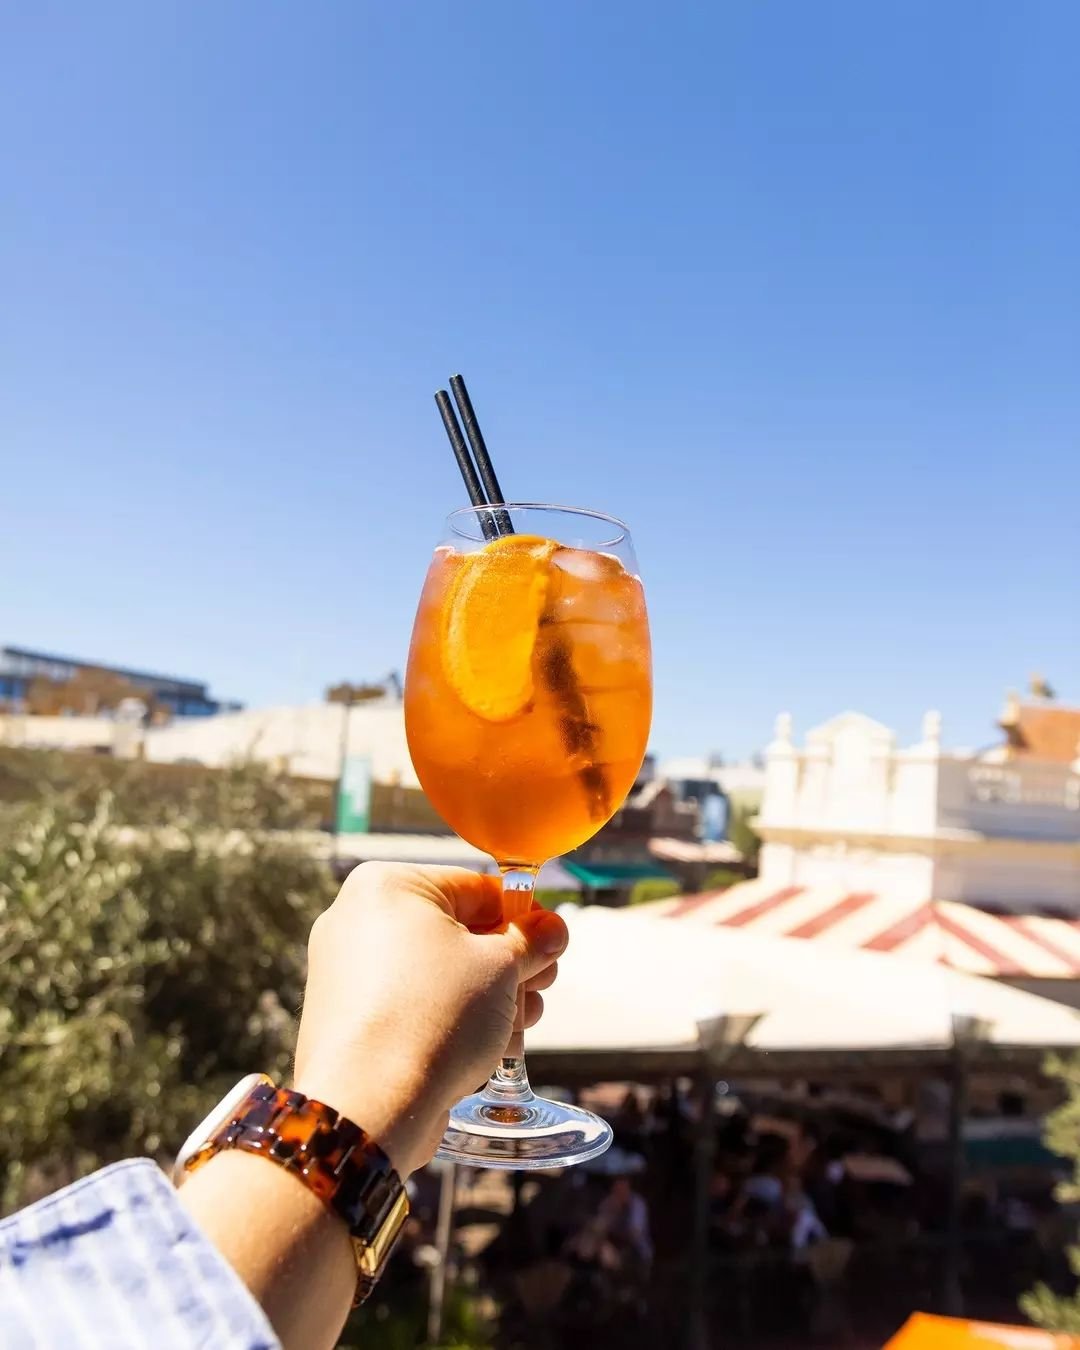 Sip on an Aperol Spritz as you watch the world go by&nbsp;🍊